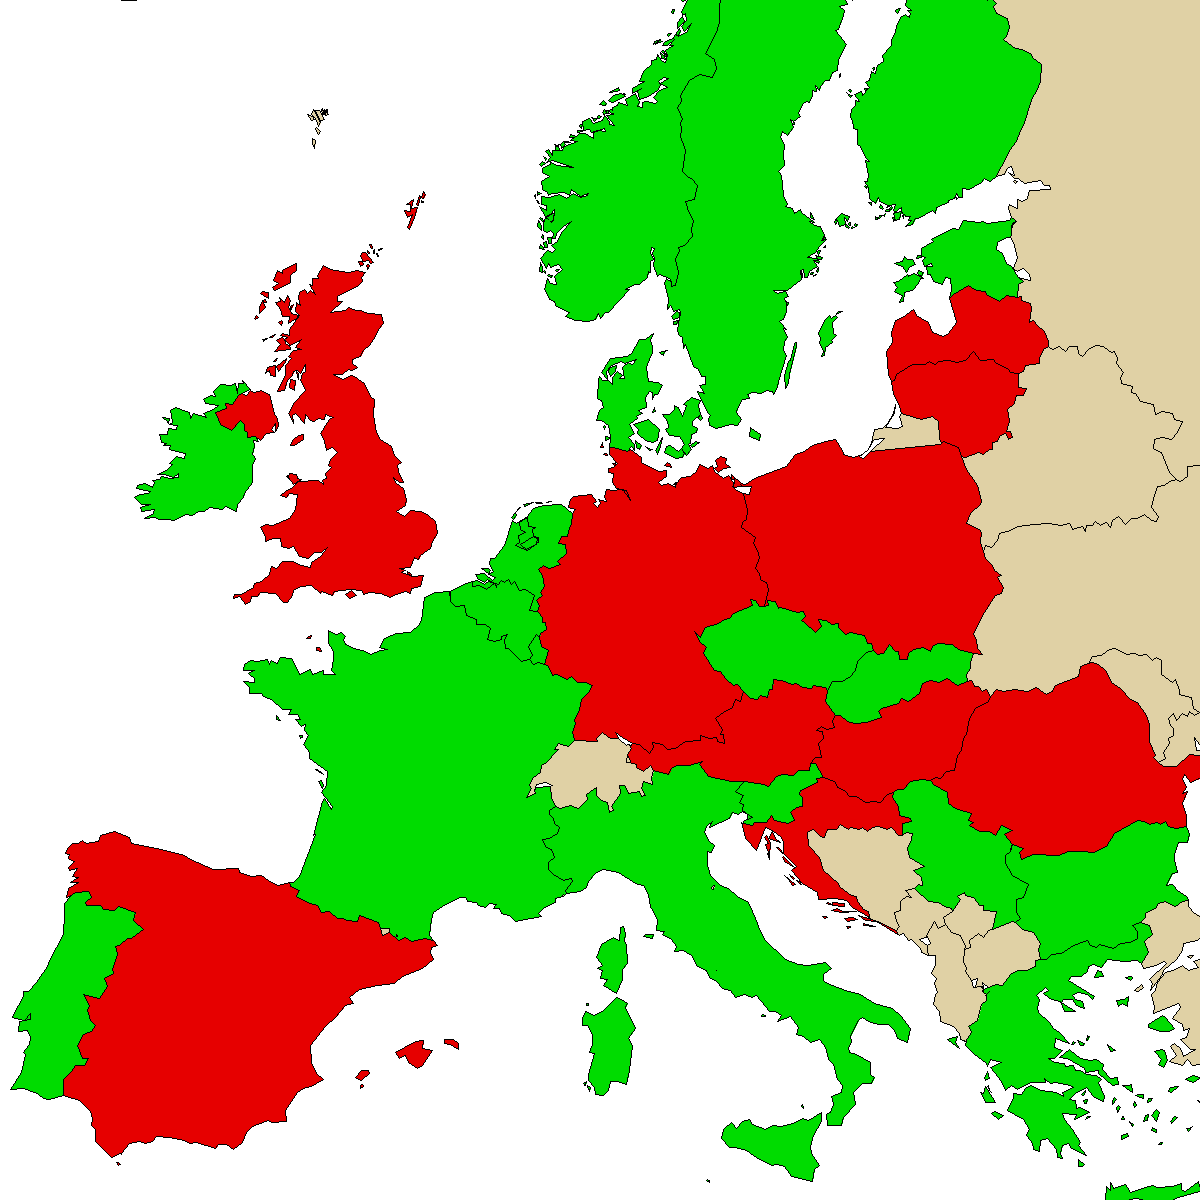 legal info map for our product Mephedrene, green are countries where we found no ban, red with ban, grey is unknown